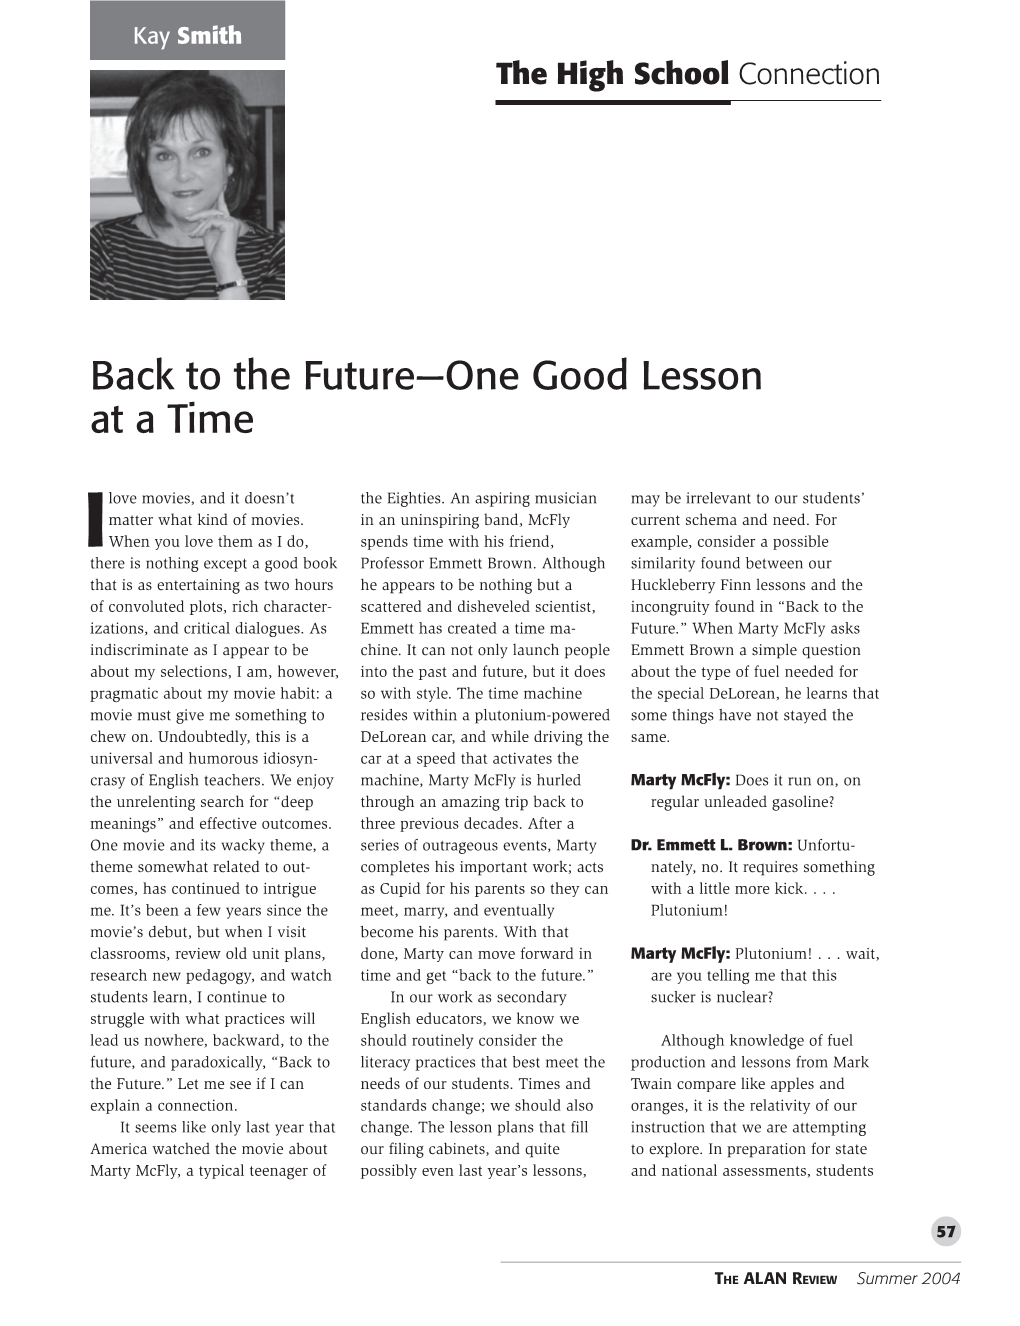 Back to the Future—One Good Lesson at a Time